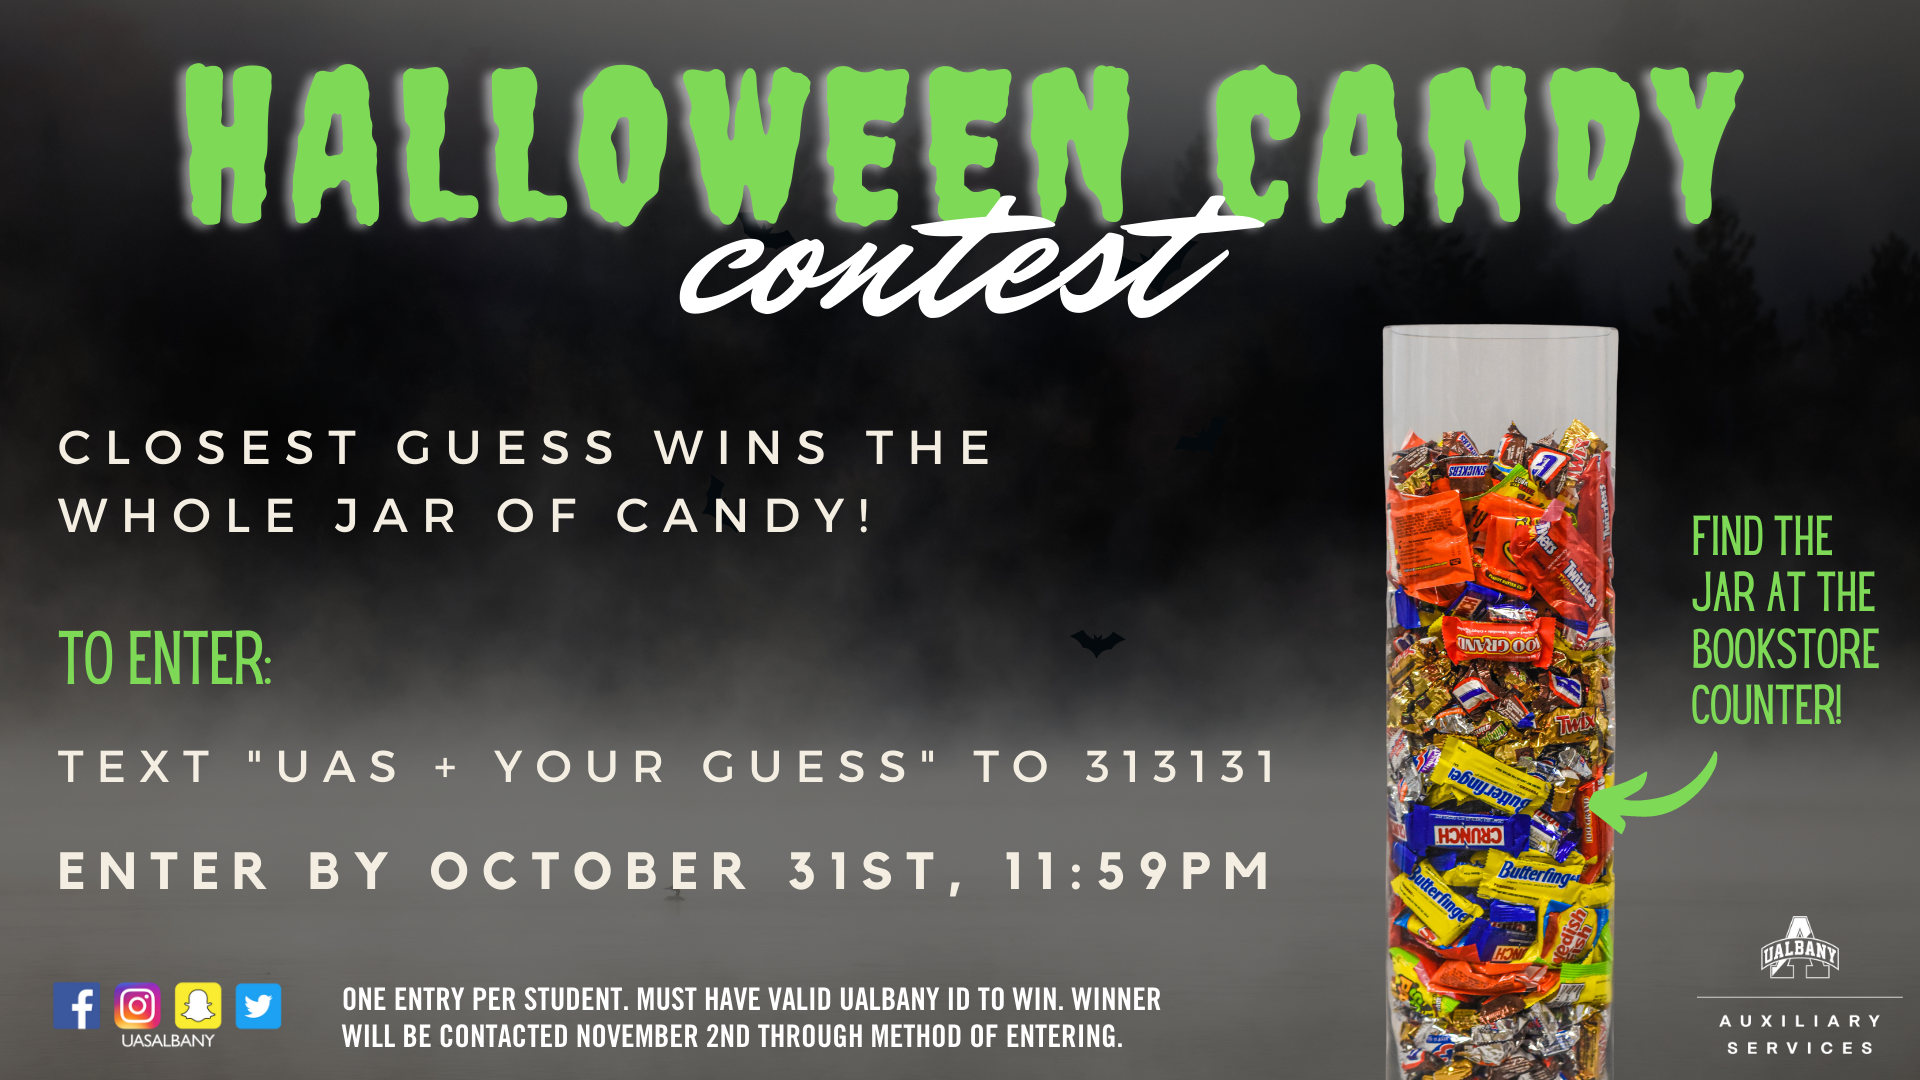 Halloween Candy Contest. Closest guess wins the whole jar of candy! To enter: Text "UAS" + your guess to 313131. Enter by October 31st, 11:59PM. One entry per student. Must have valid UAlbany ID to win. Winner will be contacted November 2nd through method of entering. Dark grey background with fog effect and bat graphics. White text with lime green accent text. UAS social media images on the bottom left corner. Facebook icon, instagram icon, snapchat icon, and twitter icon in a row. 